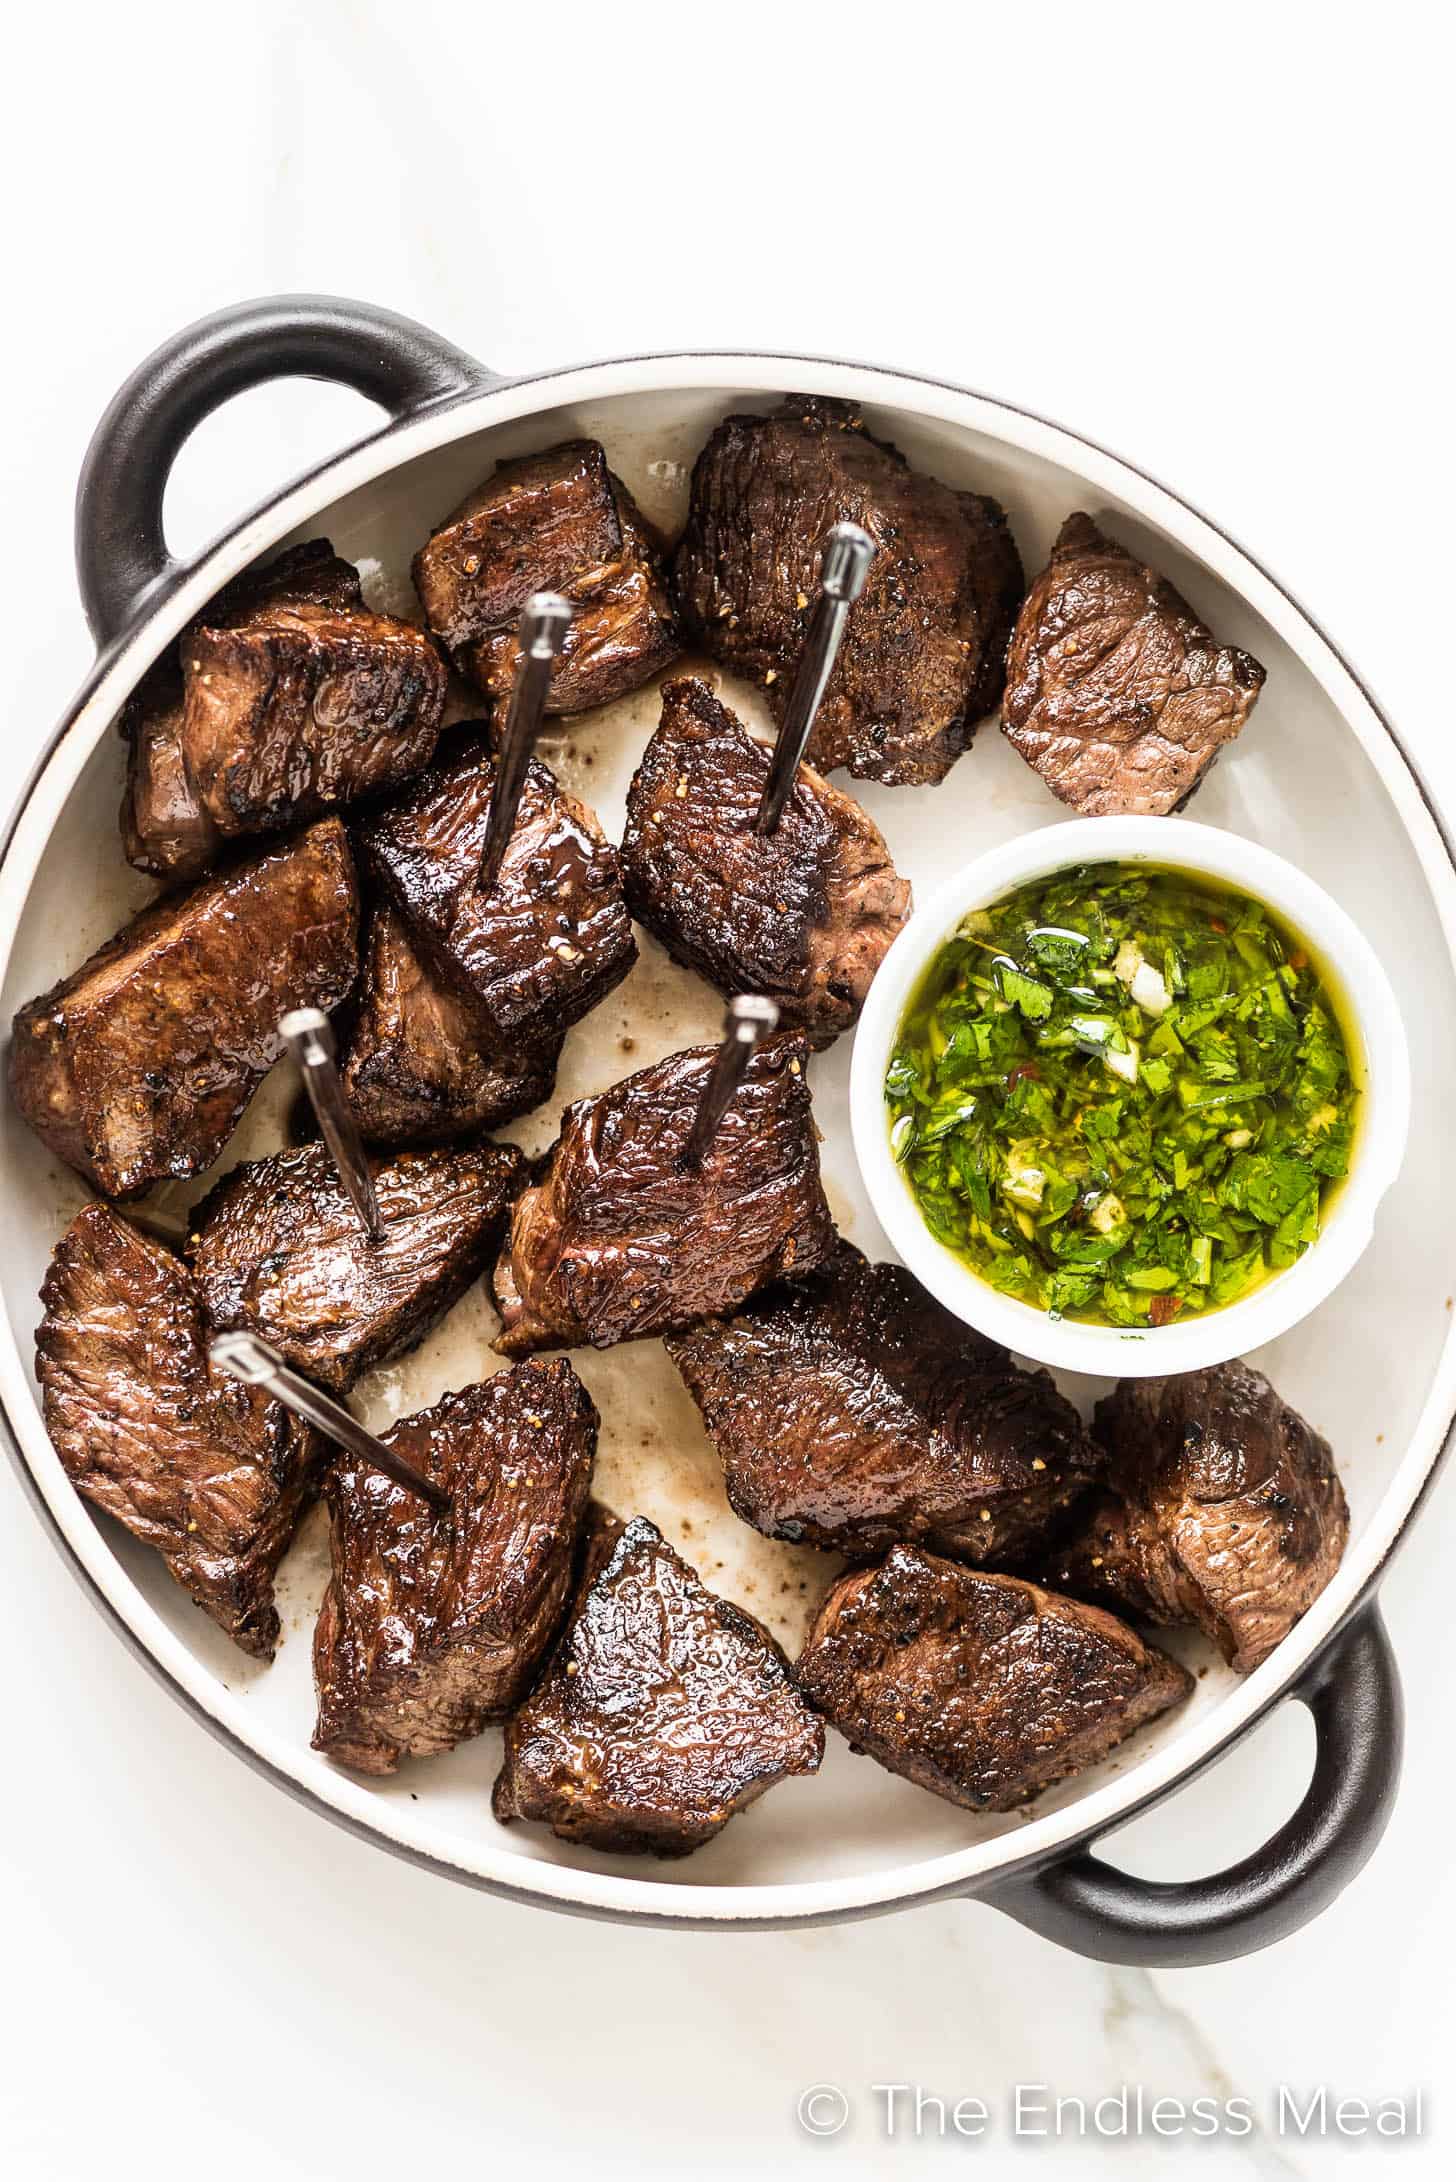 steak bites with a side of chimichurri sauce